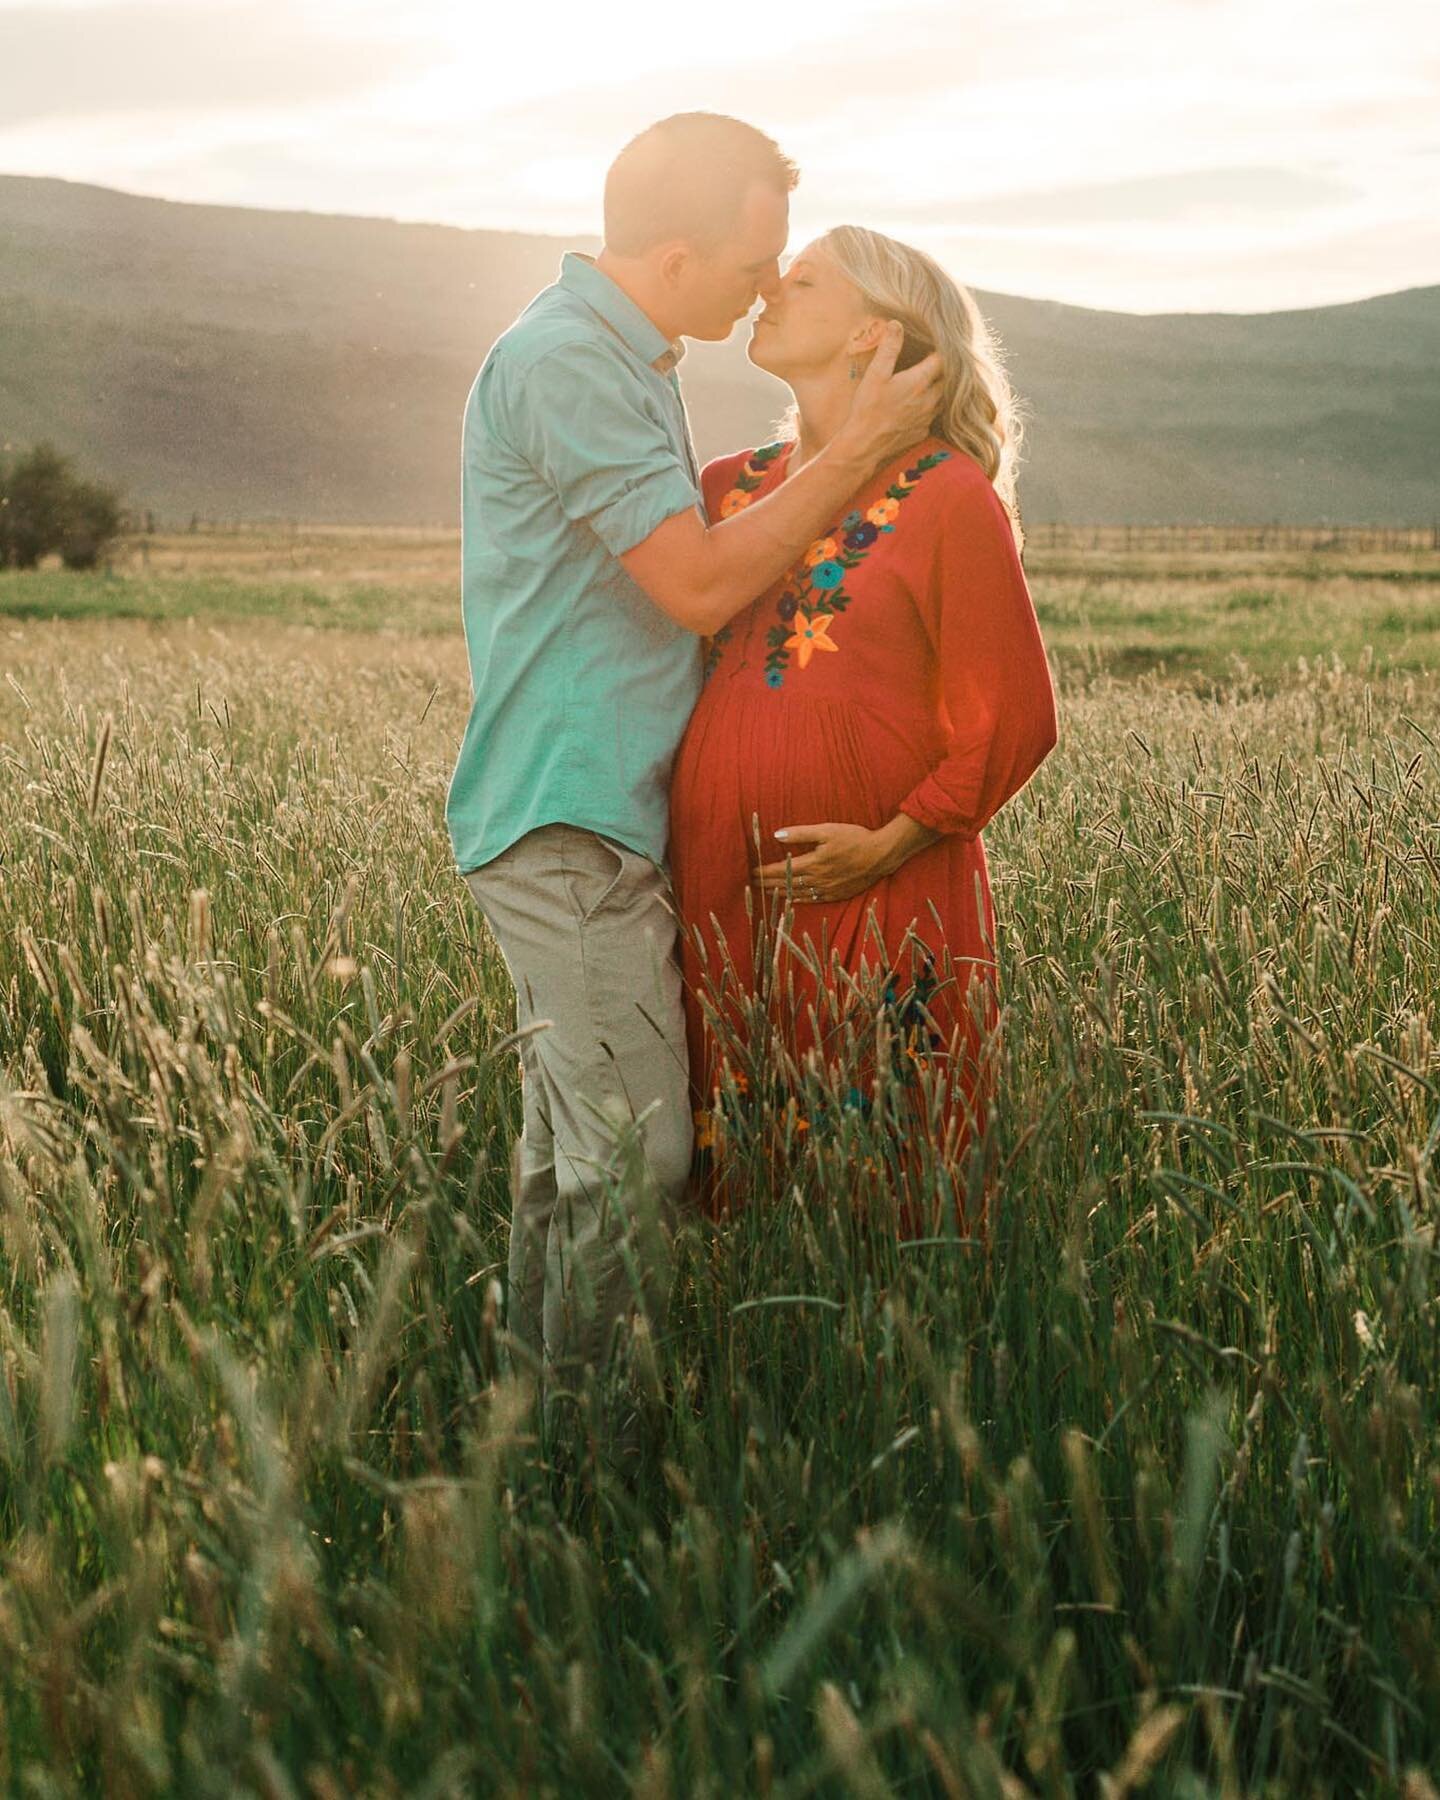 This was one of my favorites from our session. I love catching the moments which show how much love couples have for one another. Zoey is so lucky to have such wonderful parents. #sharalouderphotography #lifeisbeutiful #maternityphotography #summitco